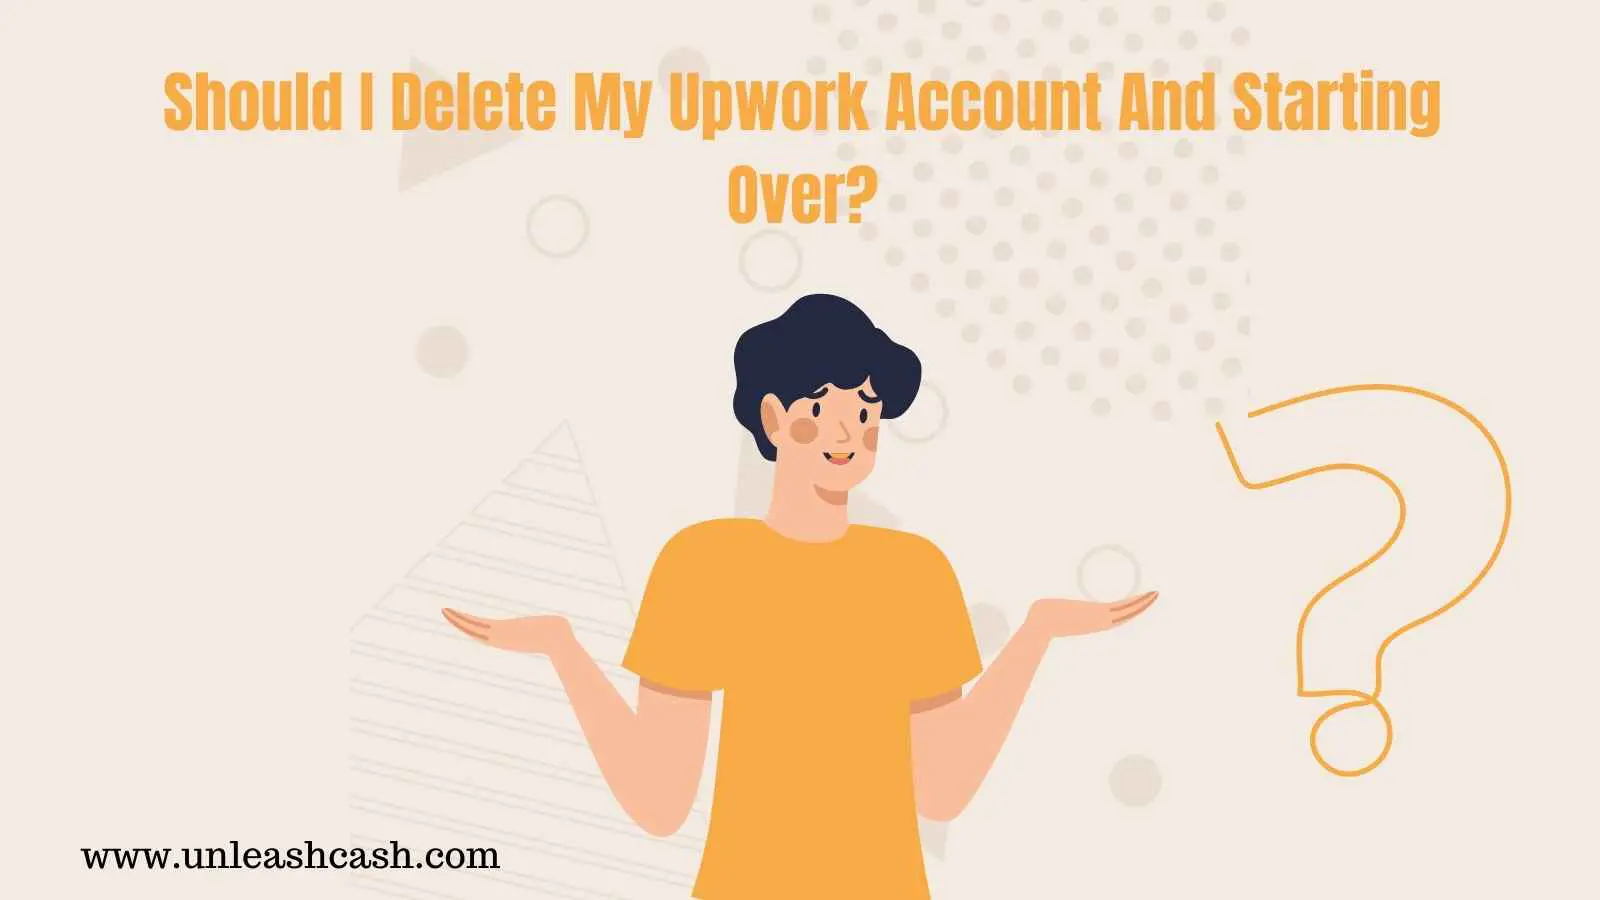 Should I Delete My Upwork Account And Starting Over?